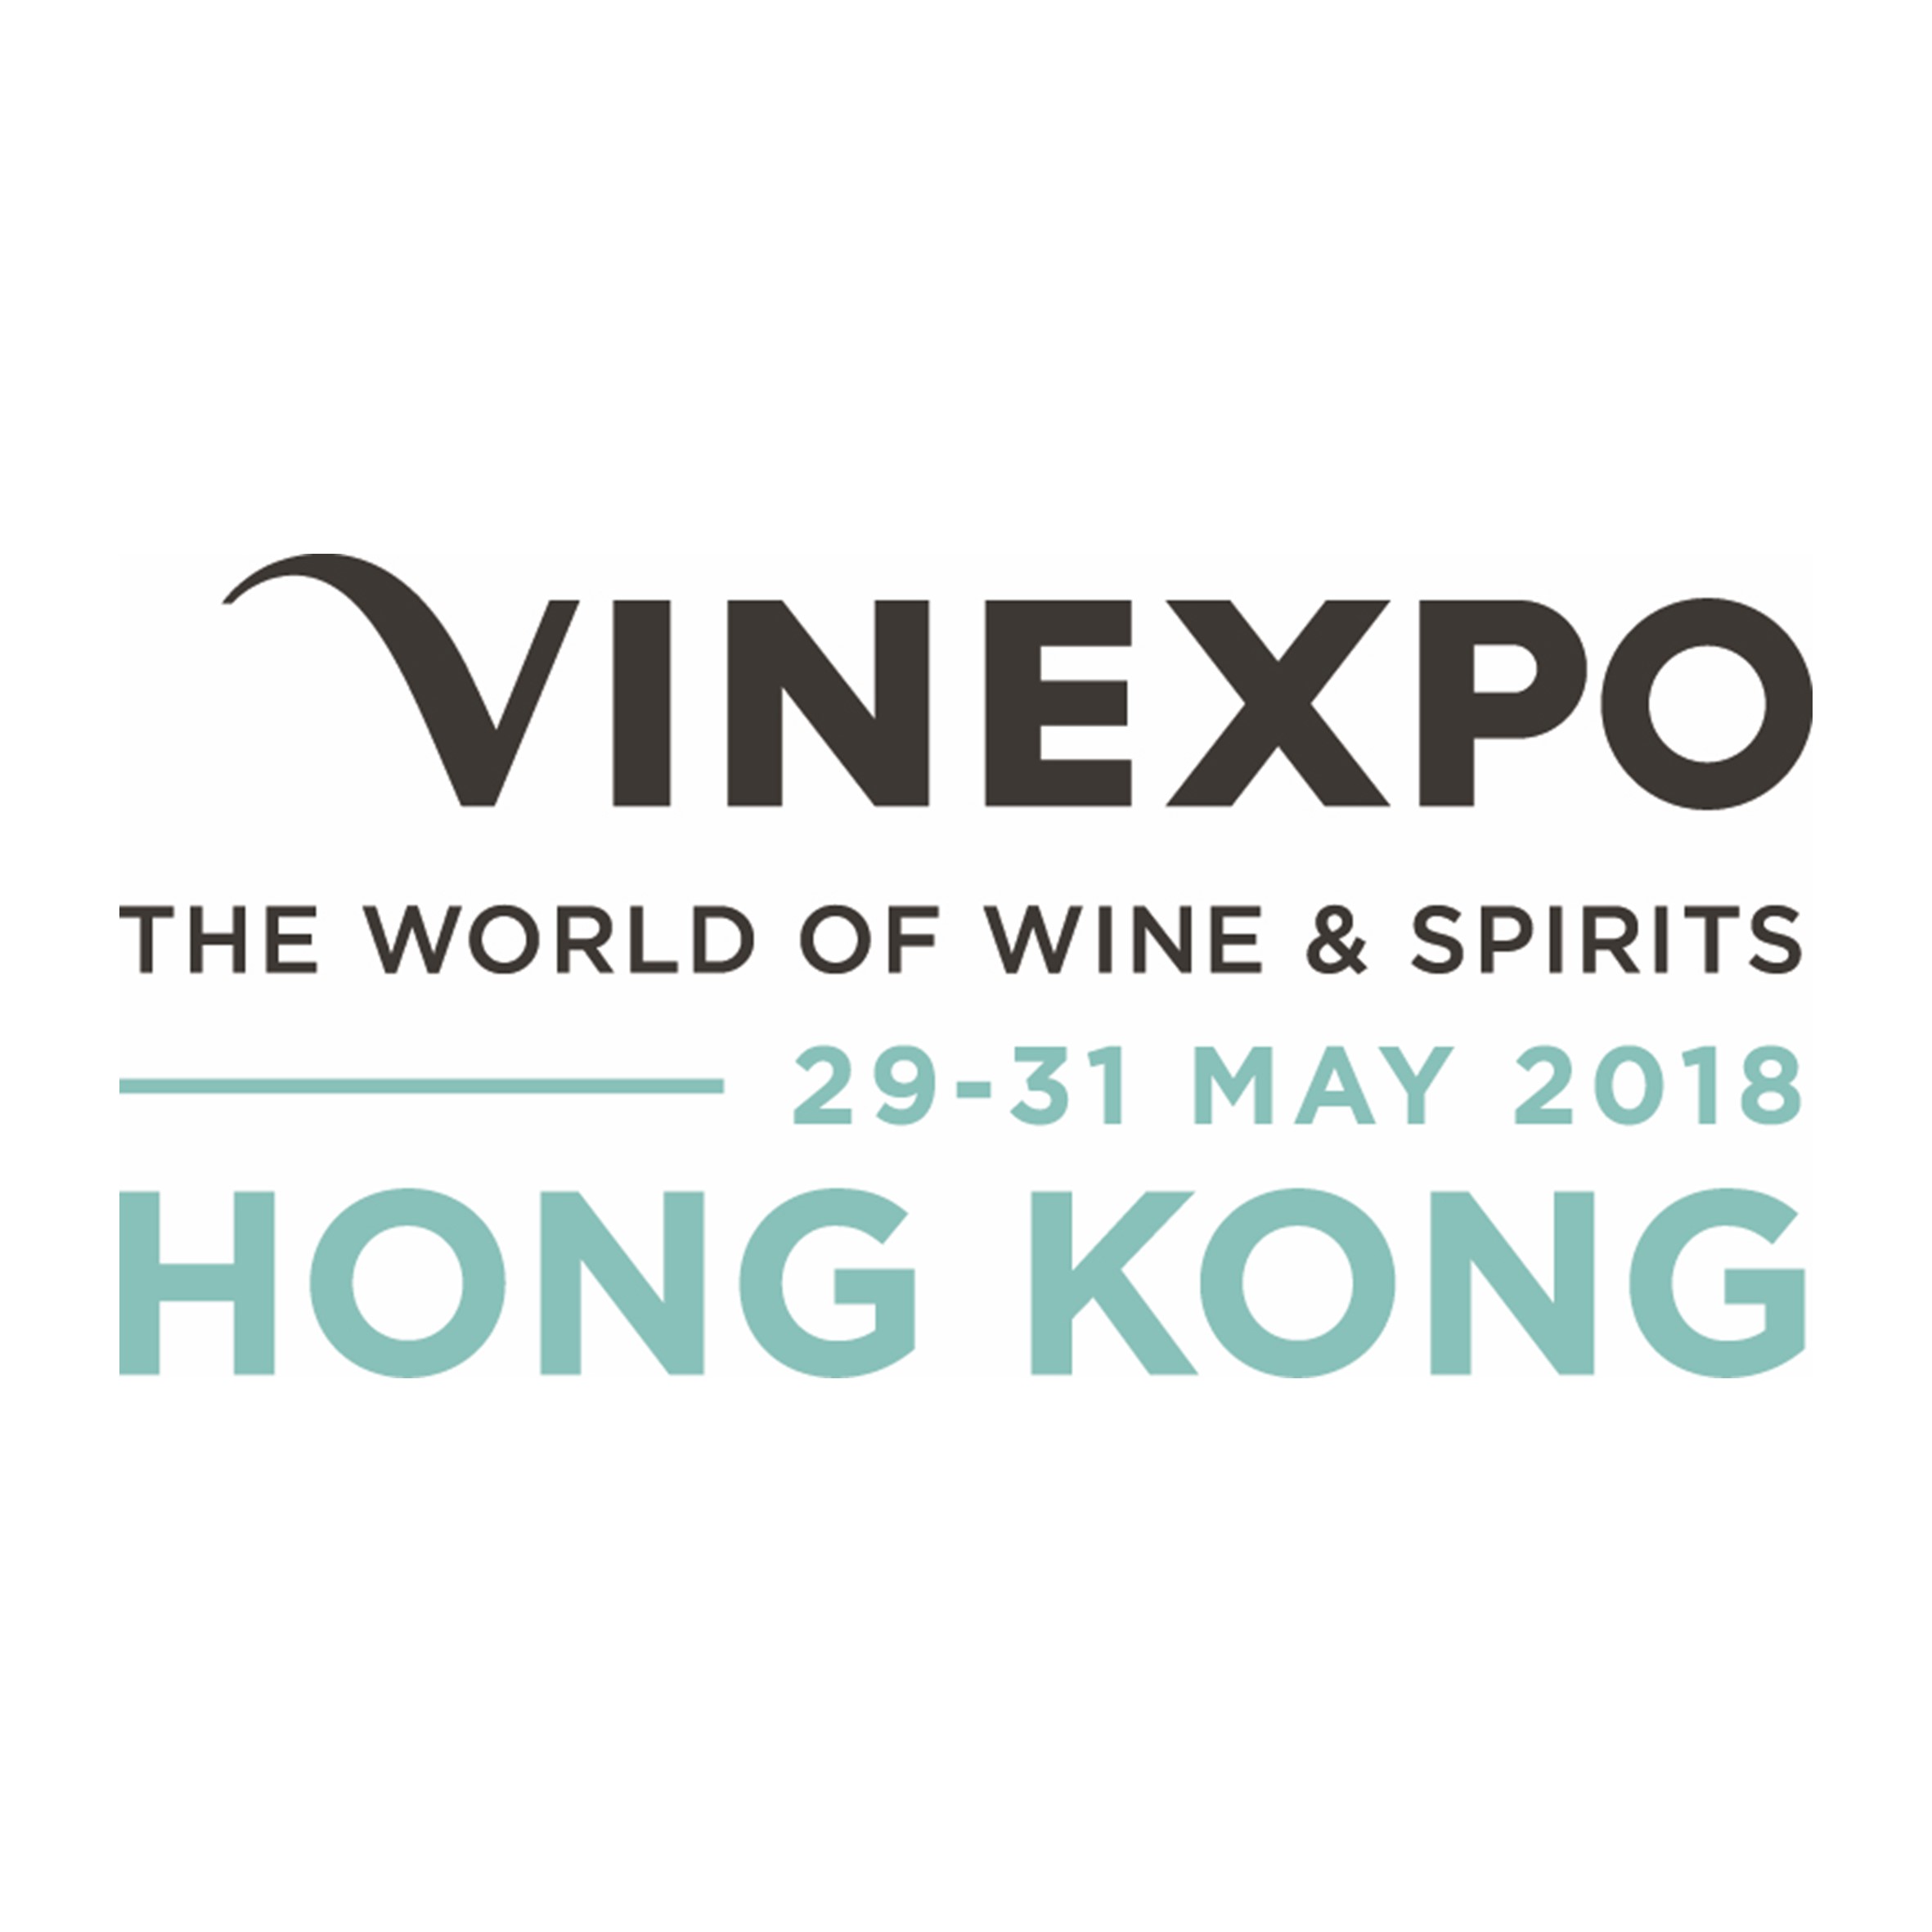 Vinexpo Hong Kong Logo 2018 - The power of numbers